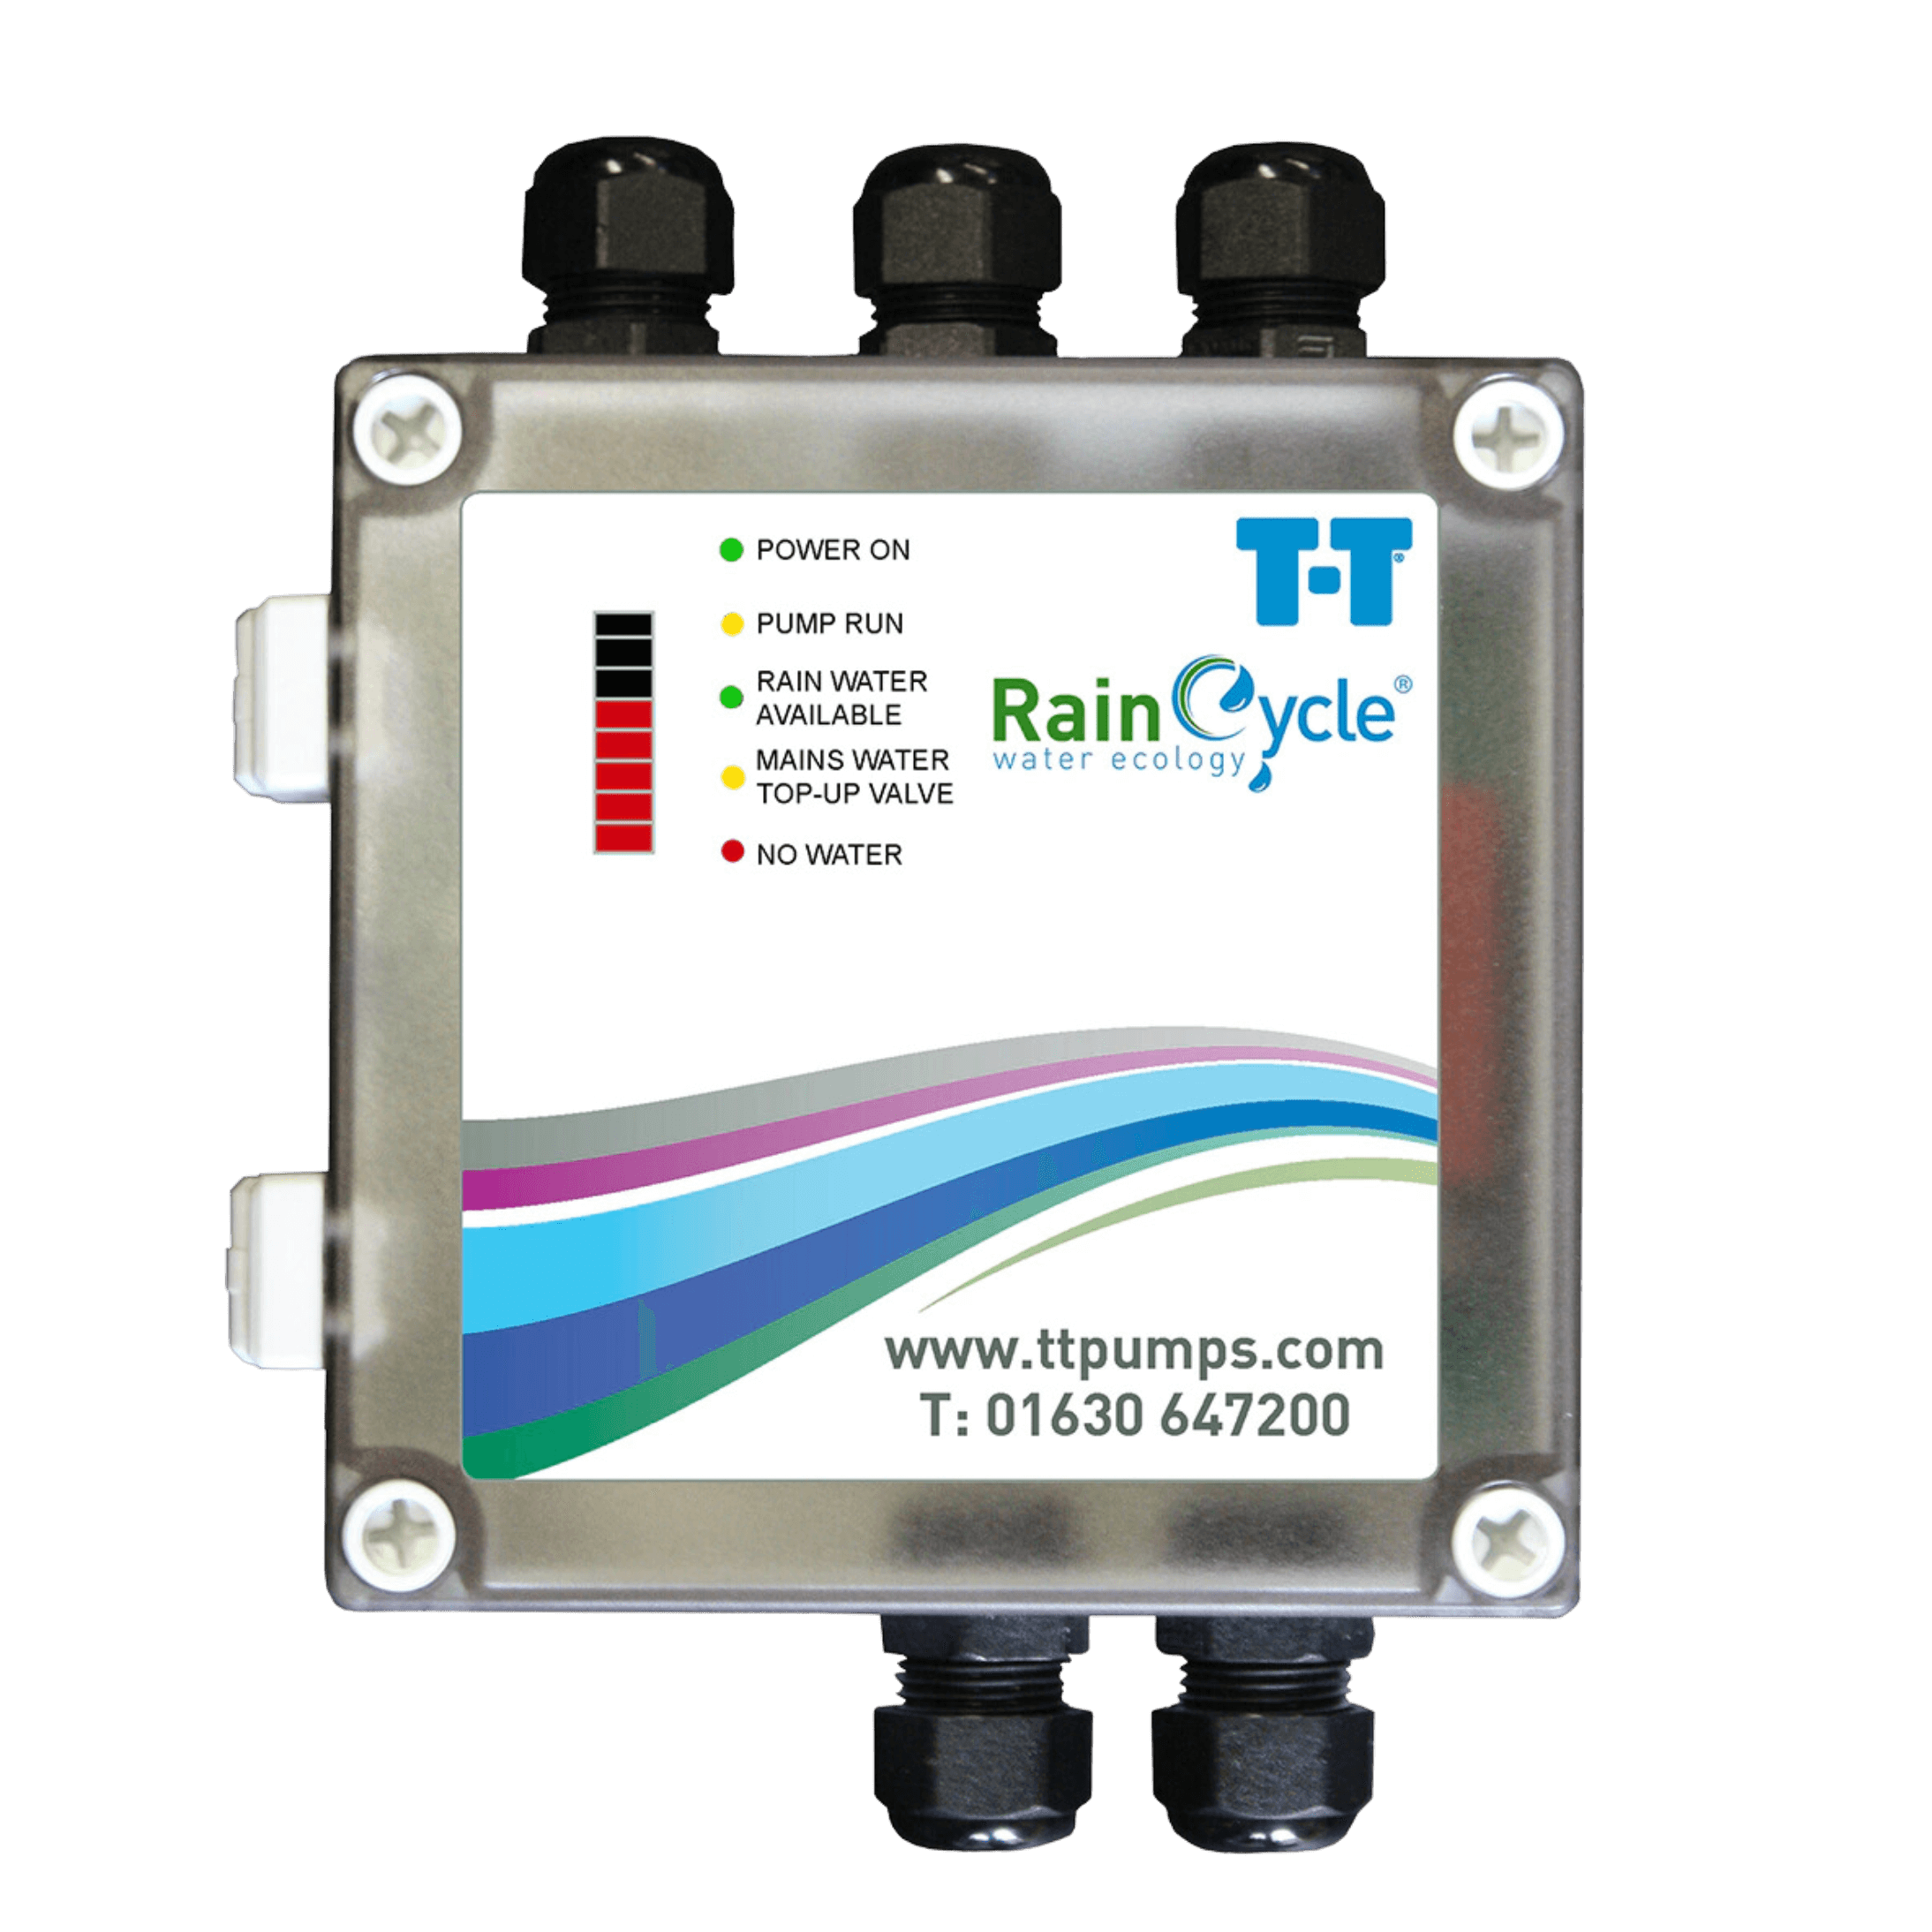 Photo of a grey control panel displaying the T-T and RainCycle Water Ecology logos and T-T contact details. Lights, some lit red, are situated left of a list of variables. Pump on, pump run, rain water available, mains water top-up, no water.